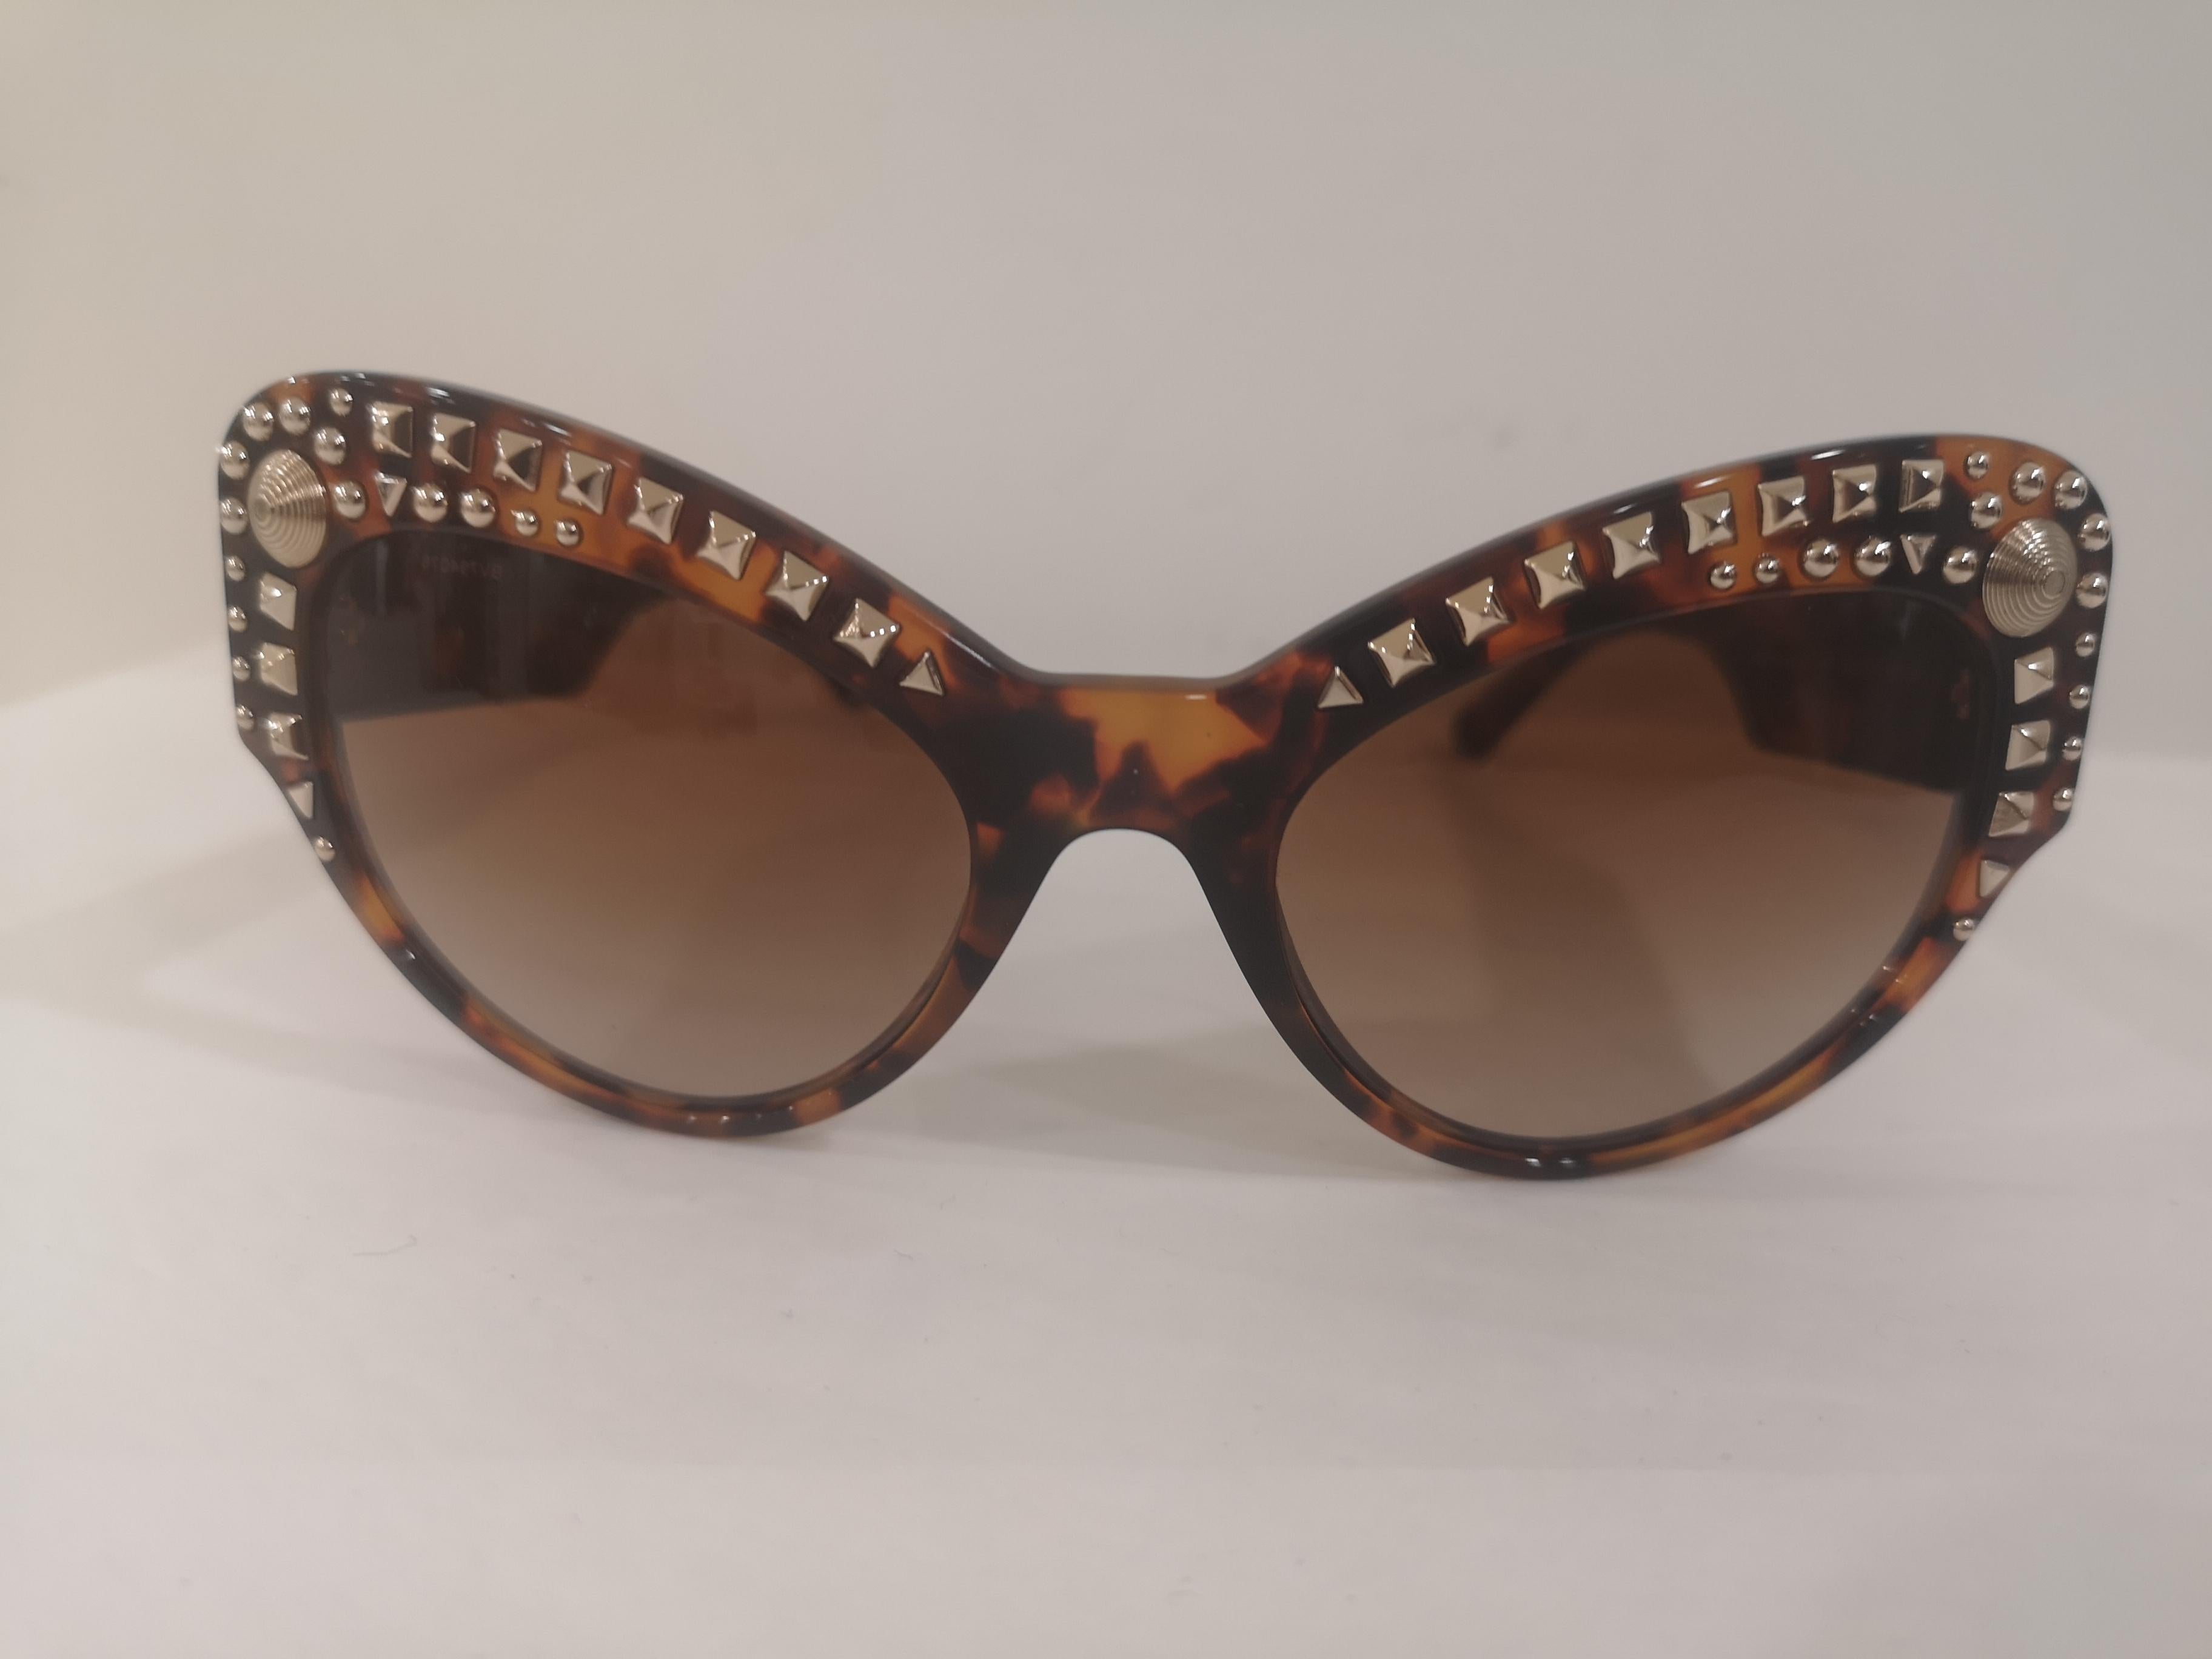 Versace tortoise gold studs Sunglasses NWOT
Gold tone studs
totally made in italy